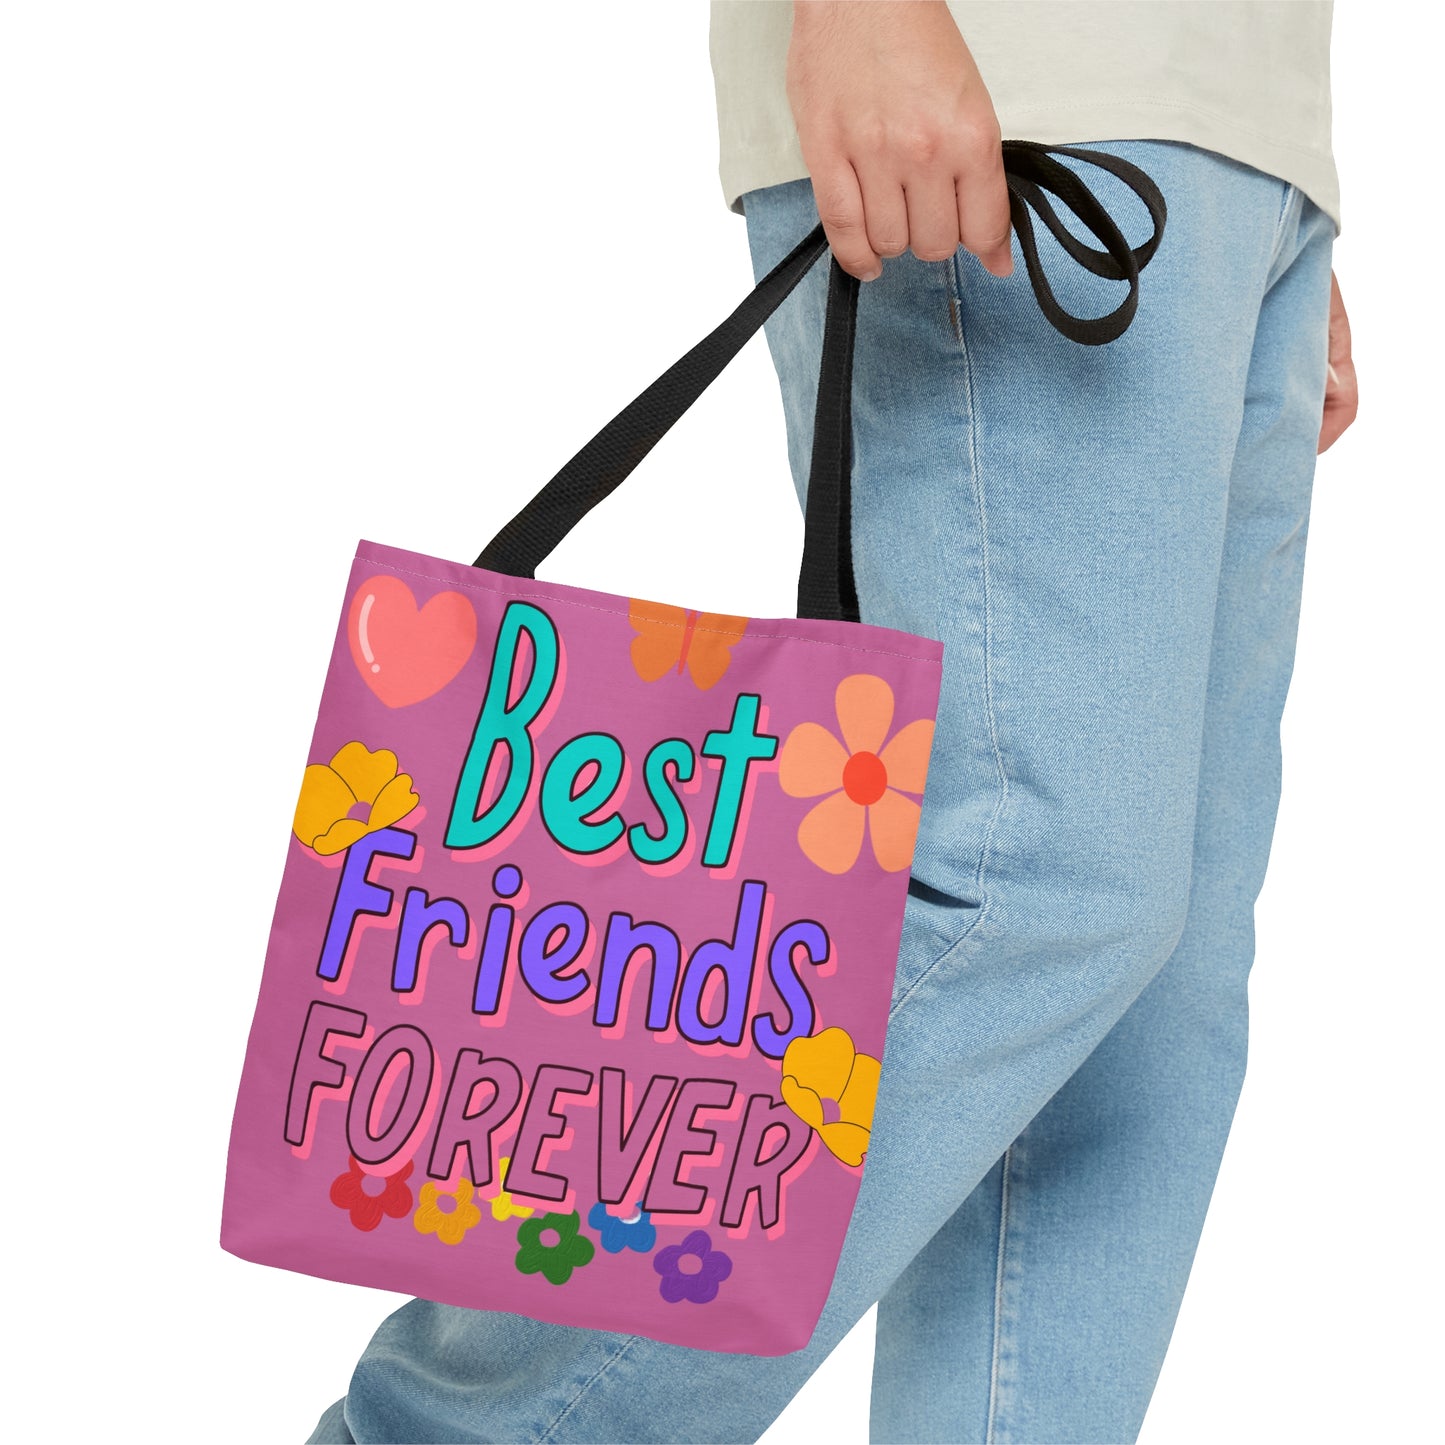 Vibrant and colorful "Best friends FOREVER" Tote Bag in 3 sizes to meet your needs.